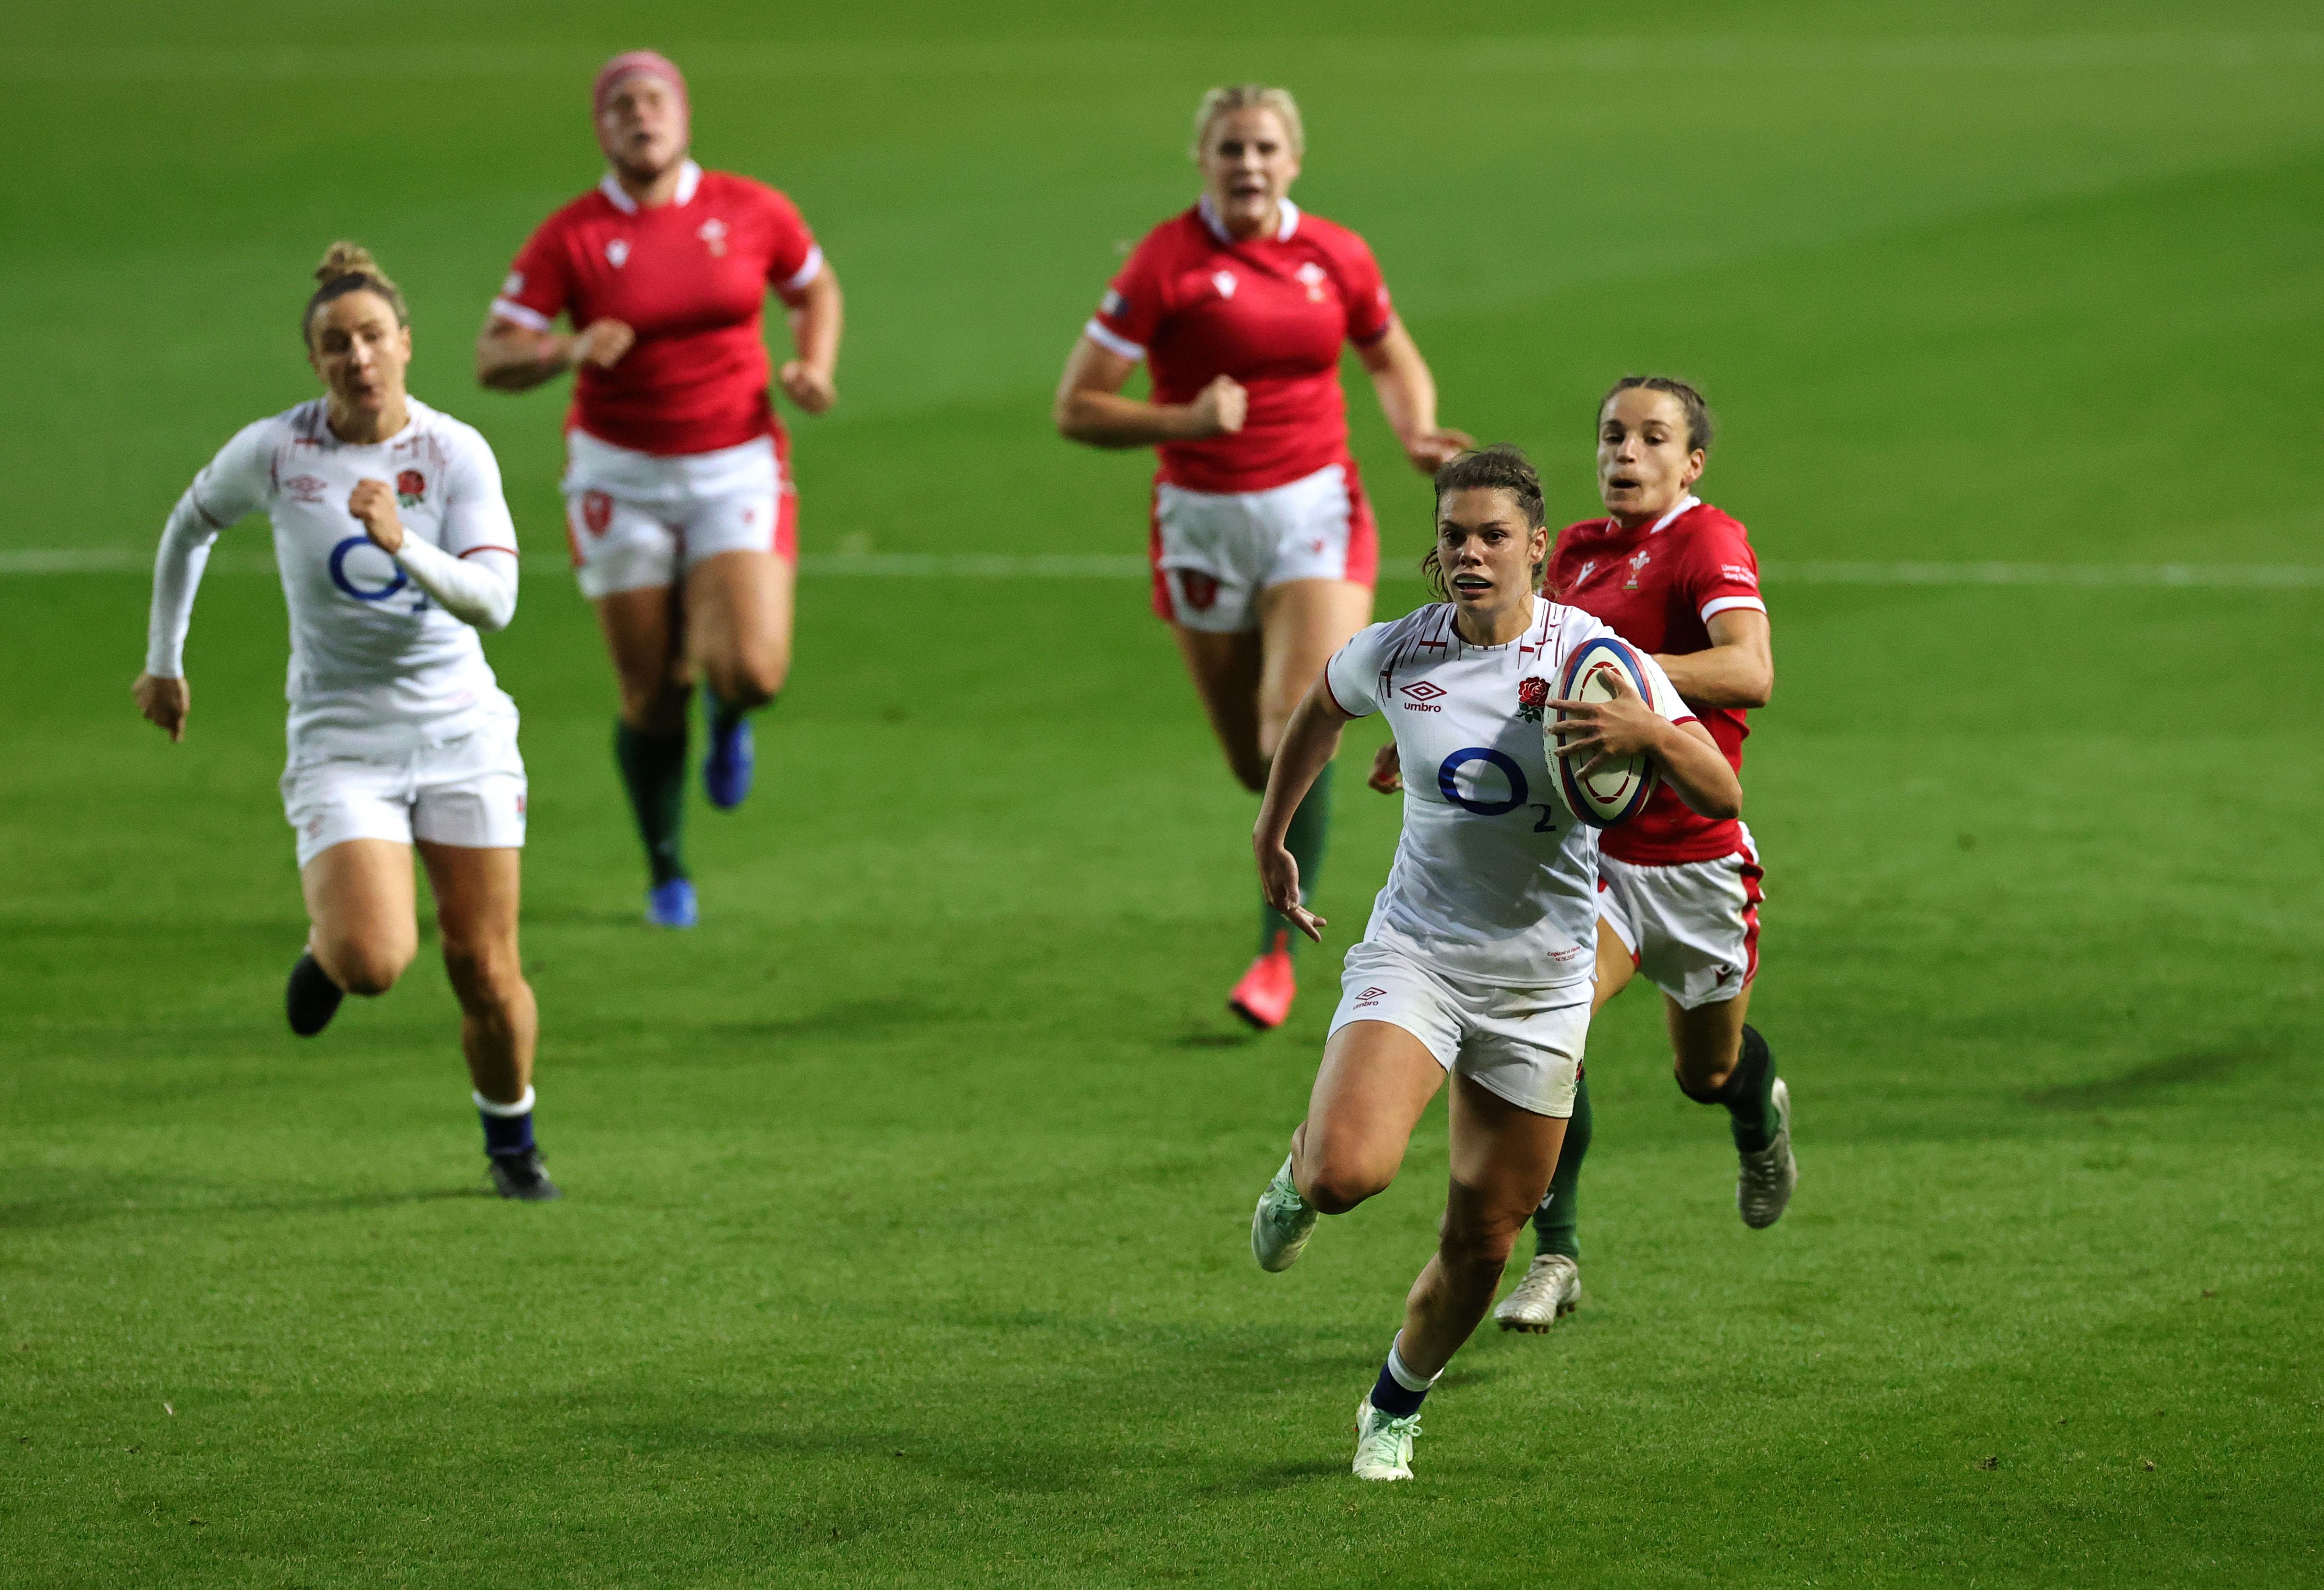 England women rugby